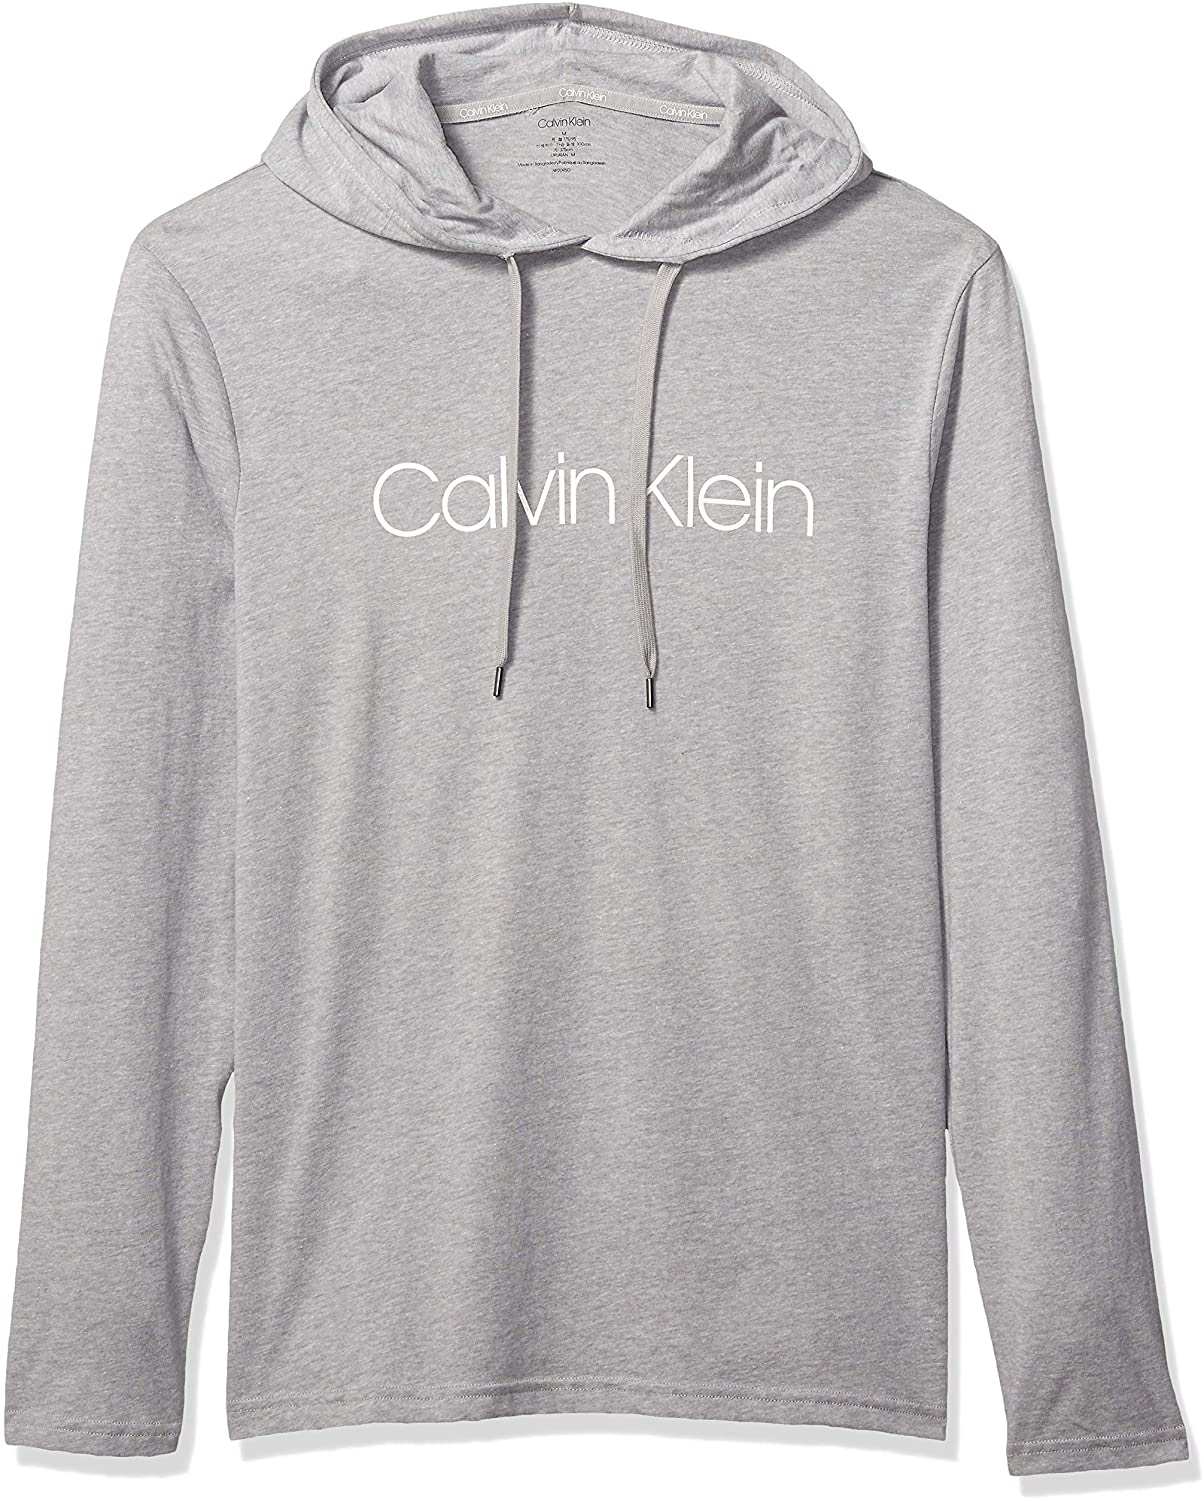 Calvin Klein 男士卫衣Men's CK Chill Lounge Pullover Hoodie, wolf grey Heather, S at Amazon Men’s Clothing store